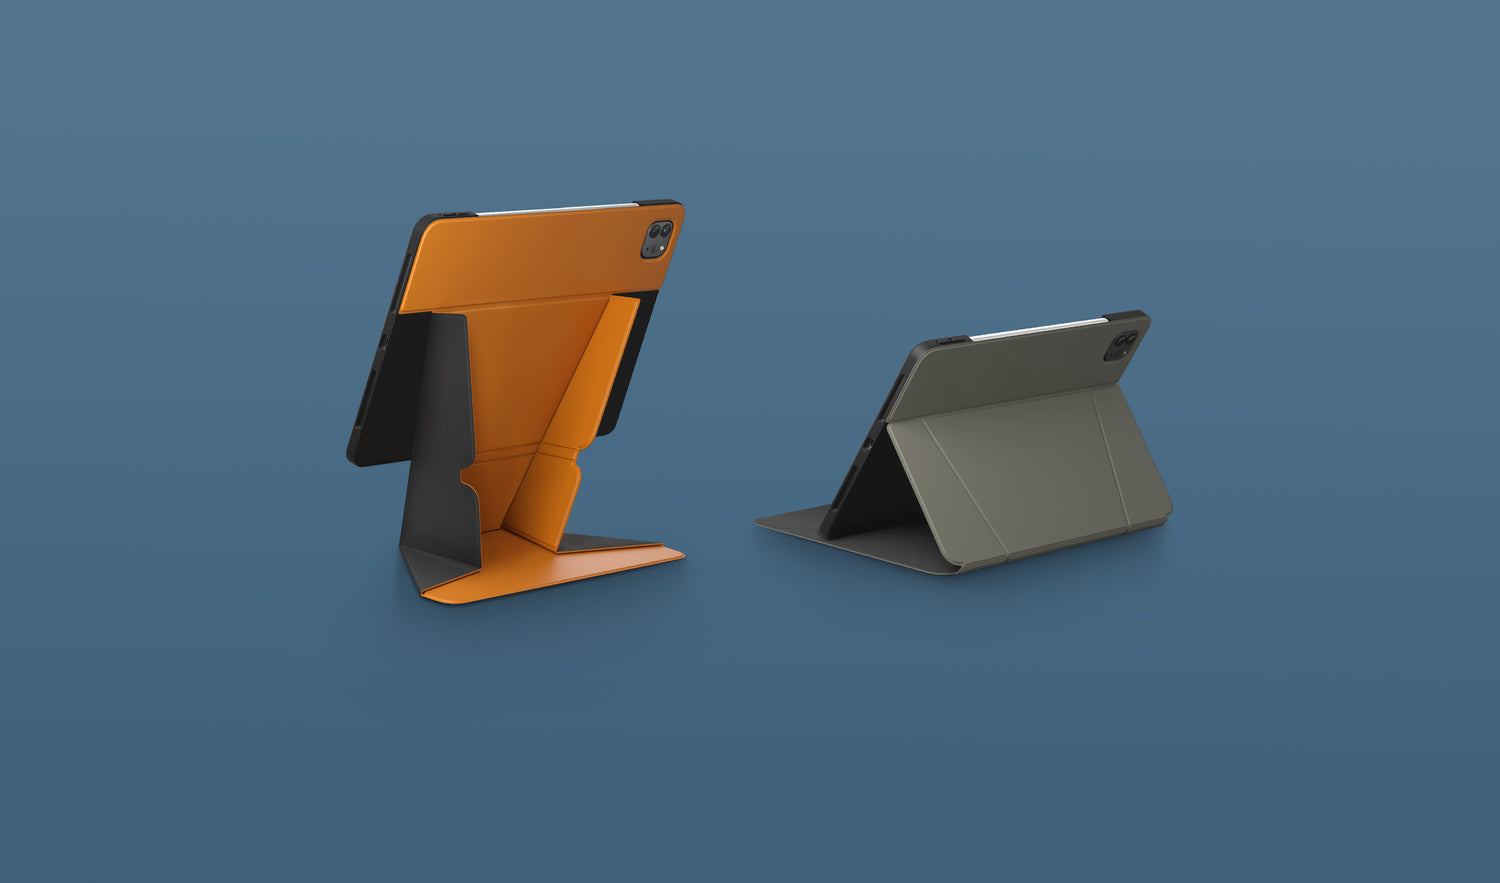 An iPad casing with foldable stand design